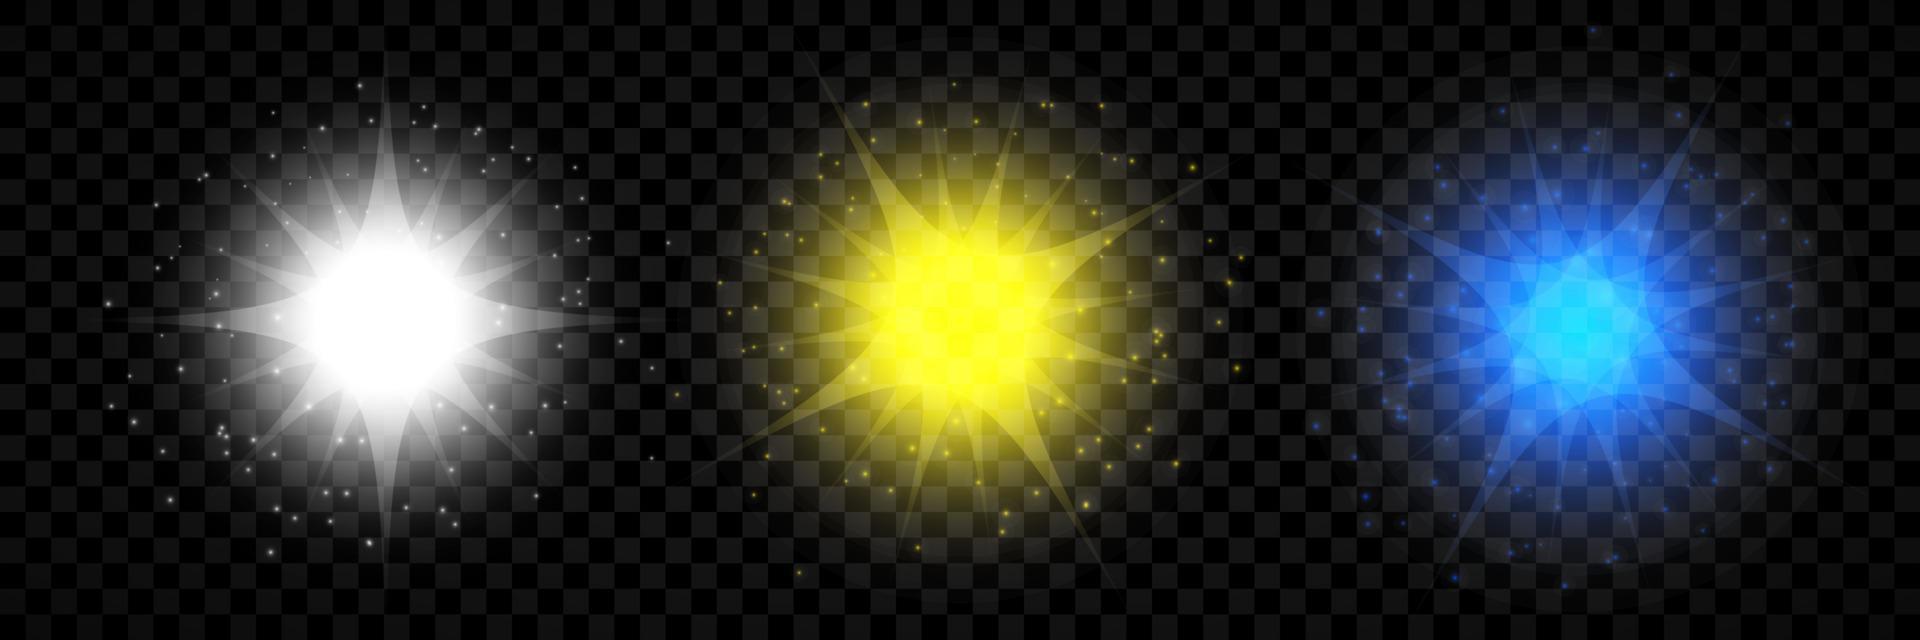 Light effect of lens flares. Set of three white, yellow and blue glowing lights starburst effects with sparkles vector